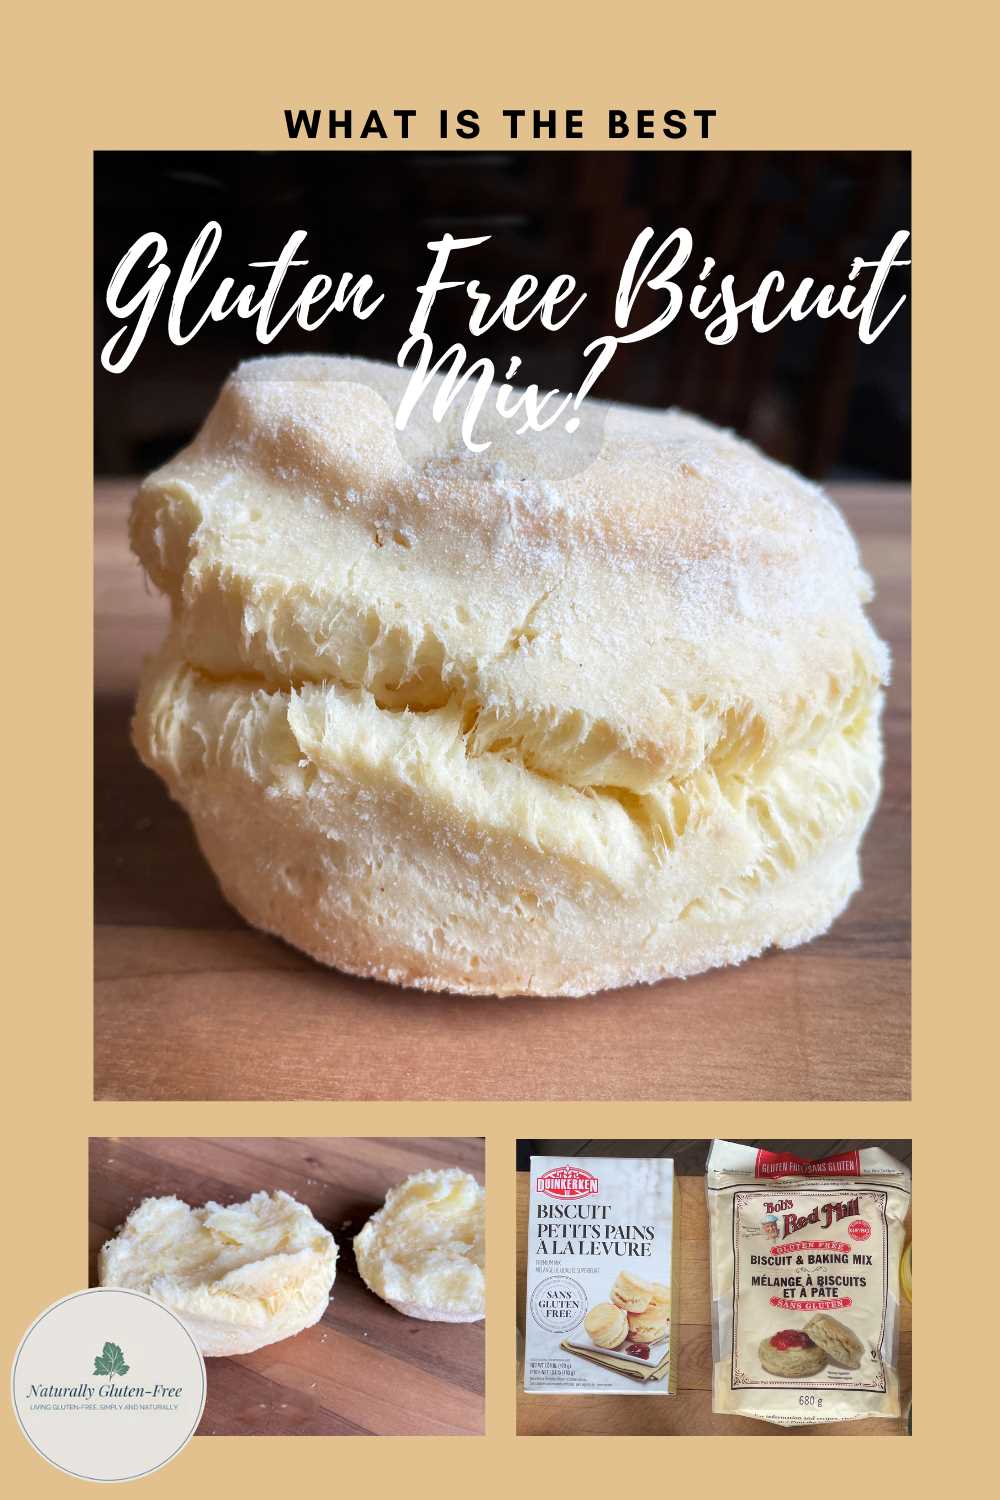 Pinterest Image - what is the best gluten free biscuit mix. Large gluten free biscuit with smaller images of packaging and an open biscuit